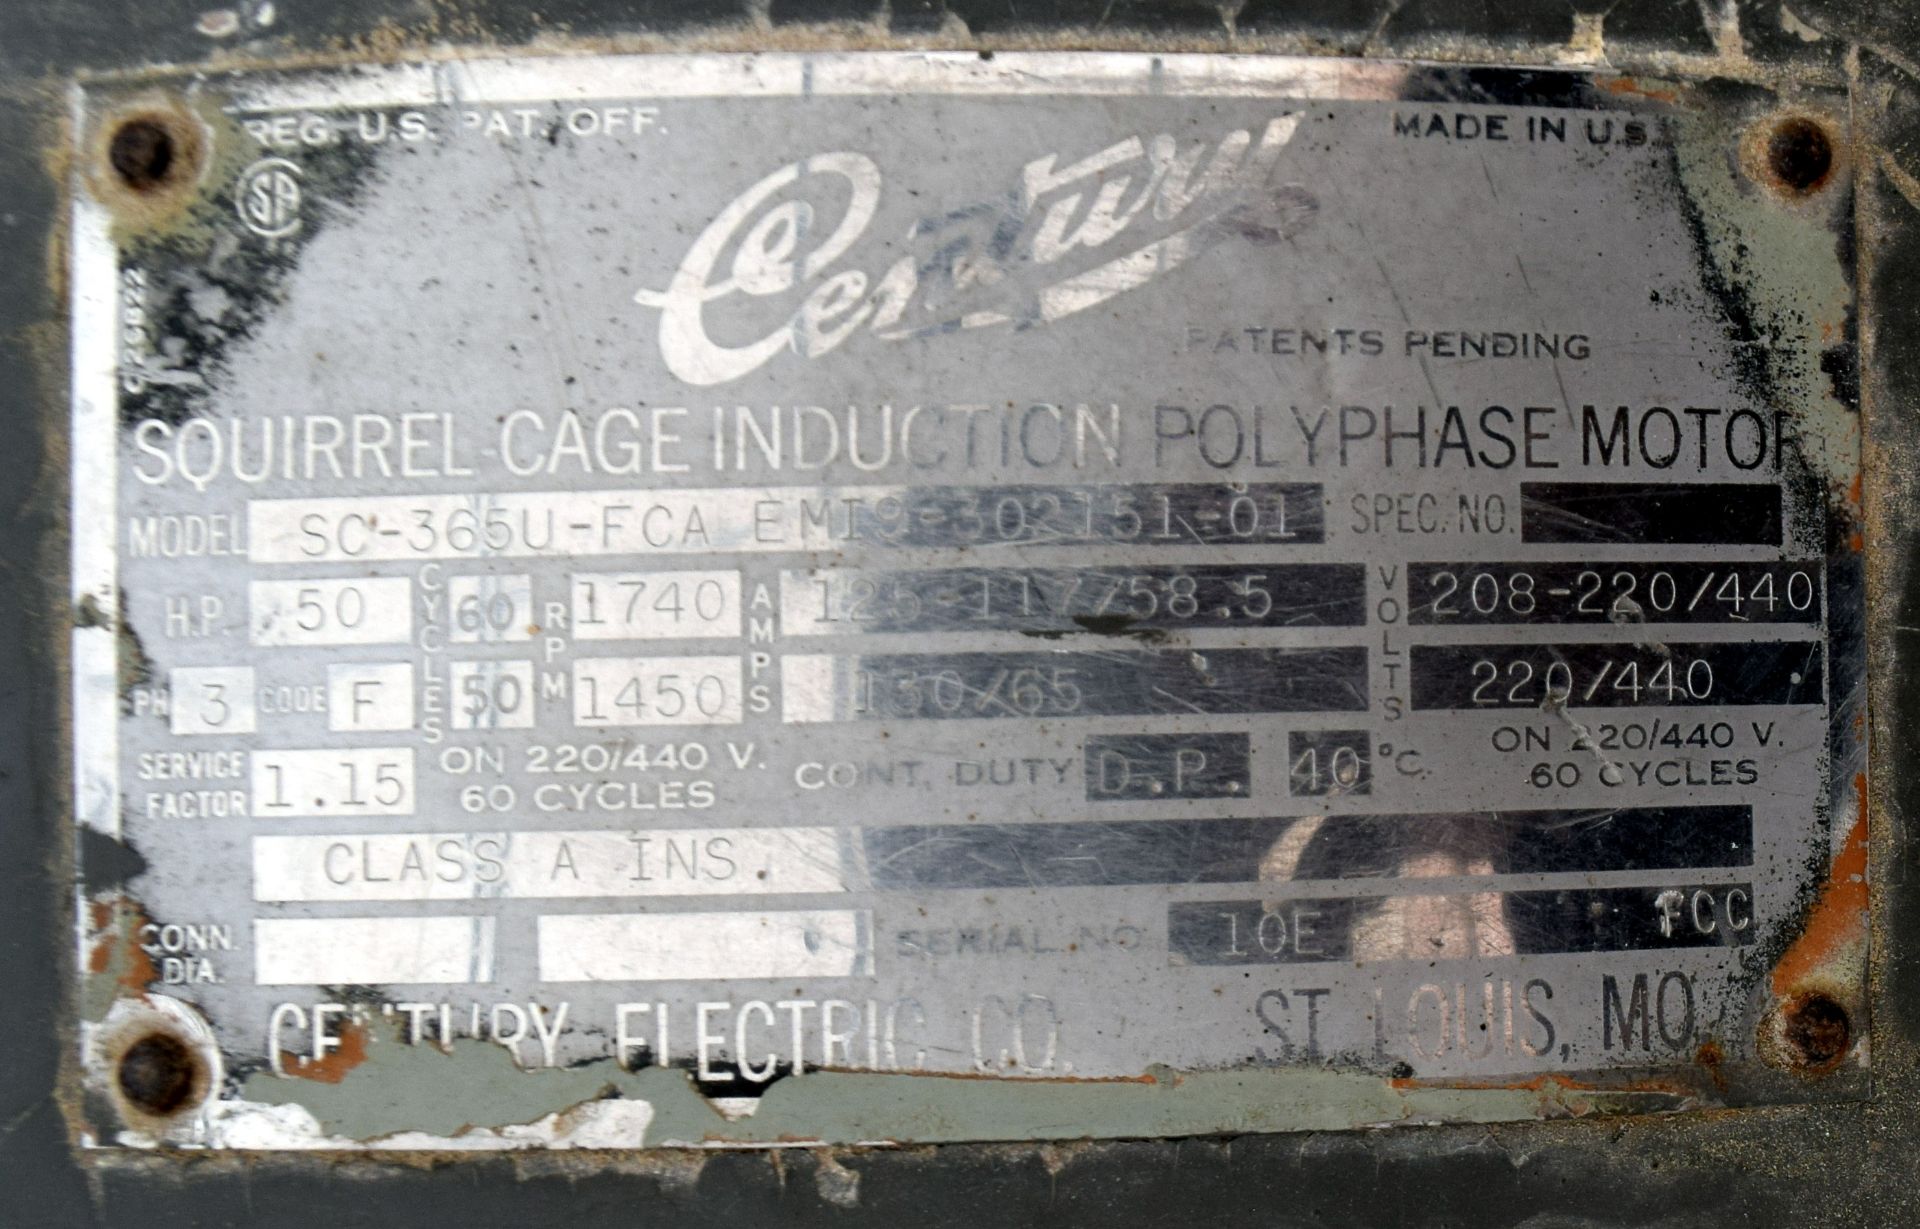 Century Electric Squirrel Cage Induction Polyphase 50hp Motor - Image 3 of 3